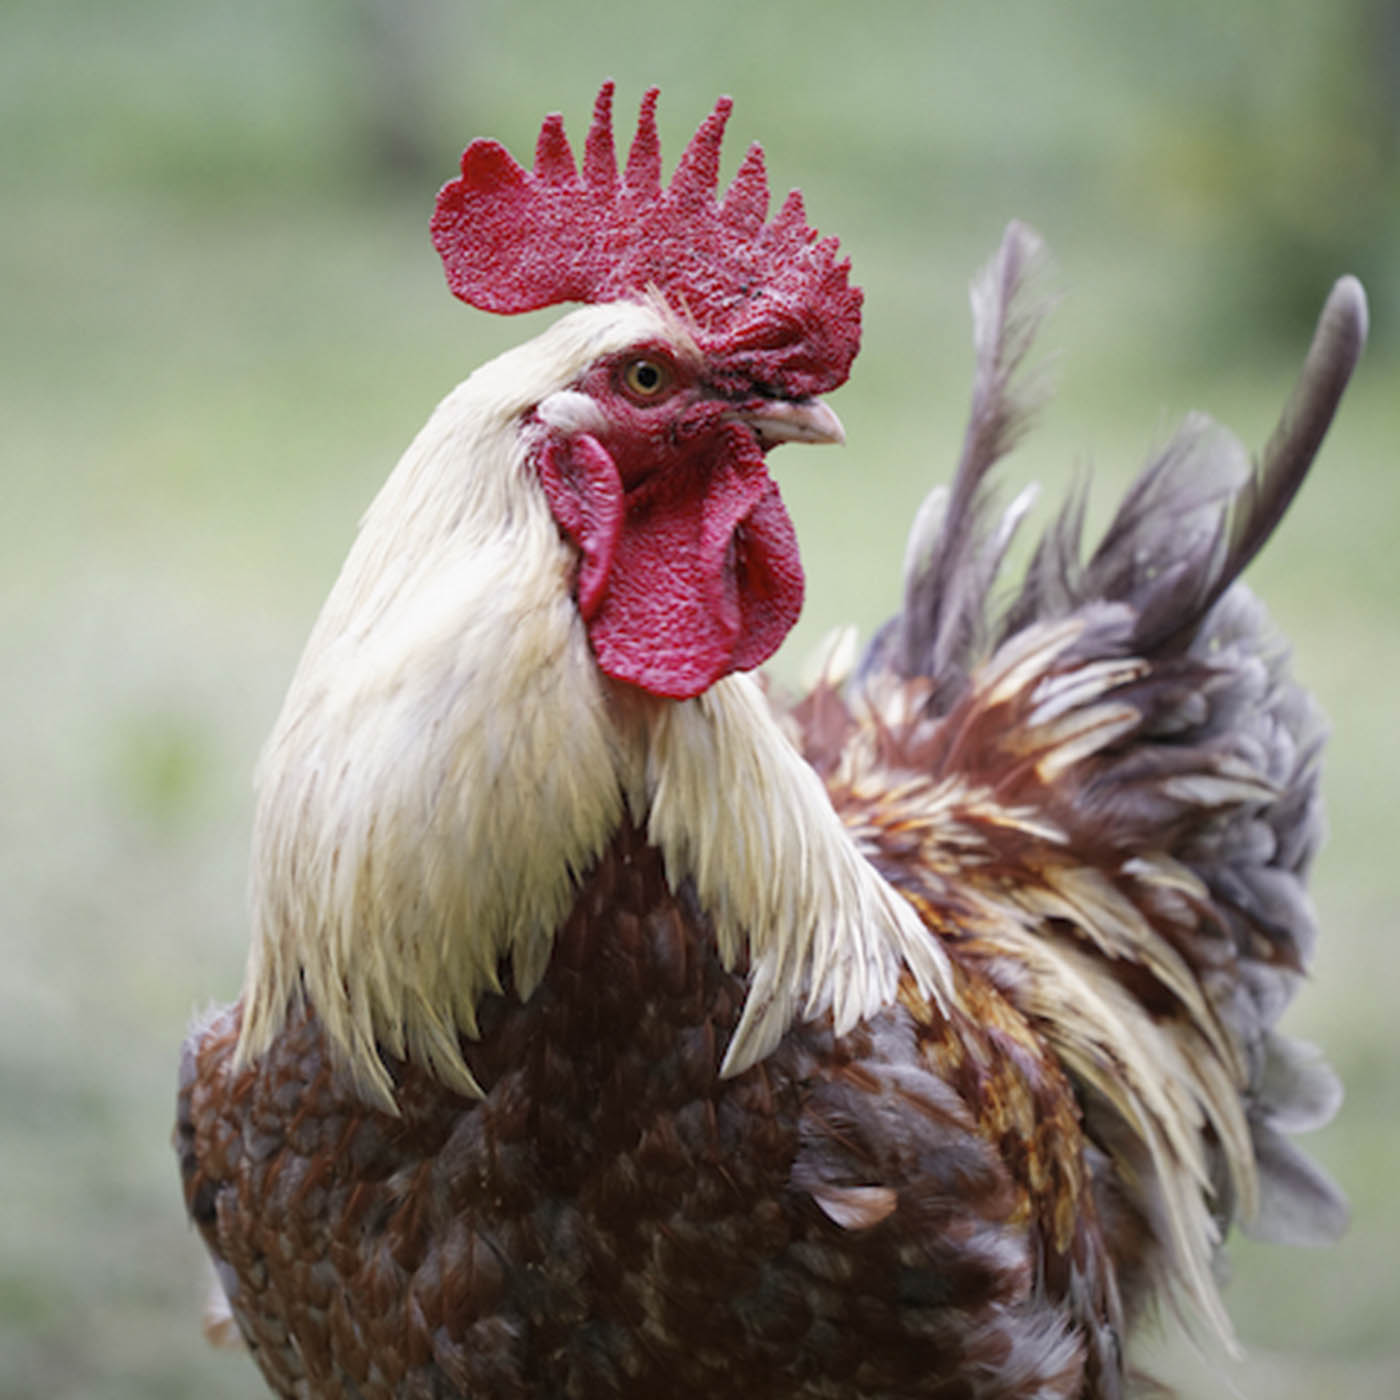 6 Surprising Facts About Farmed Animals' Intelligence